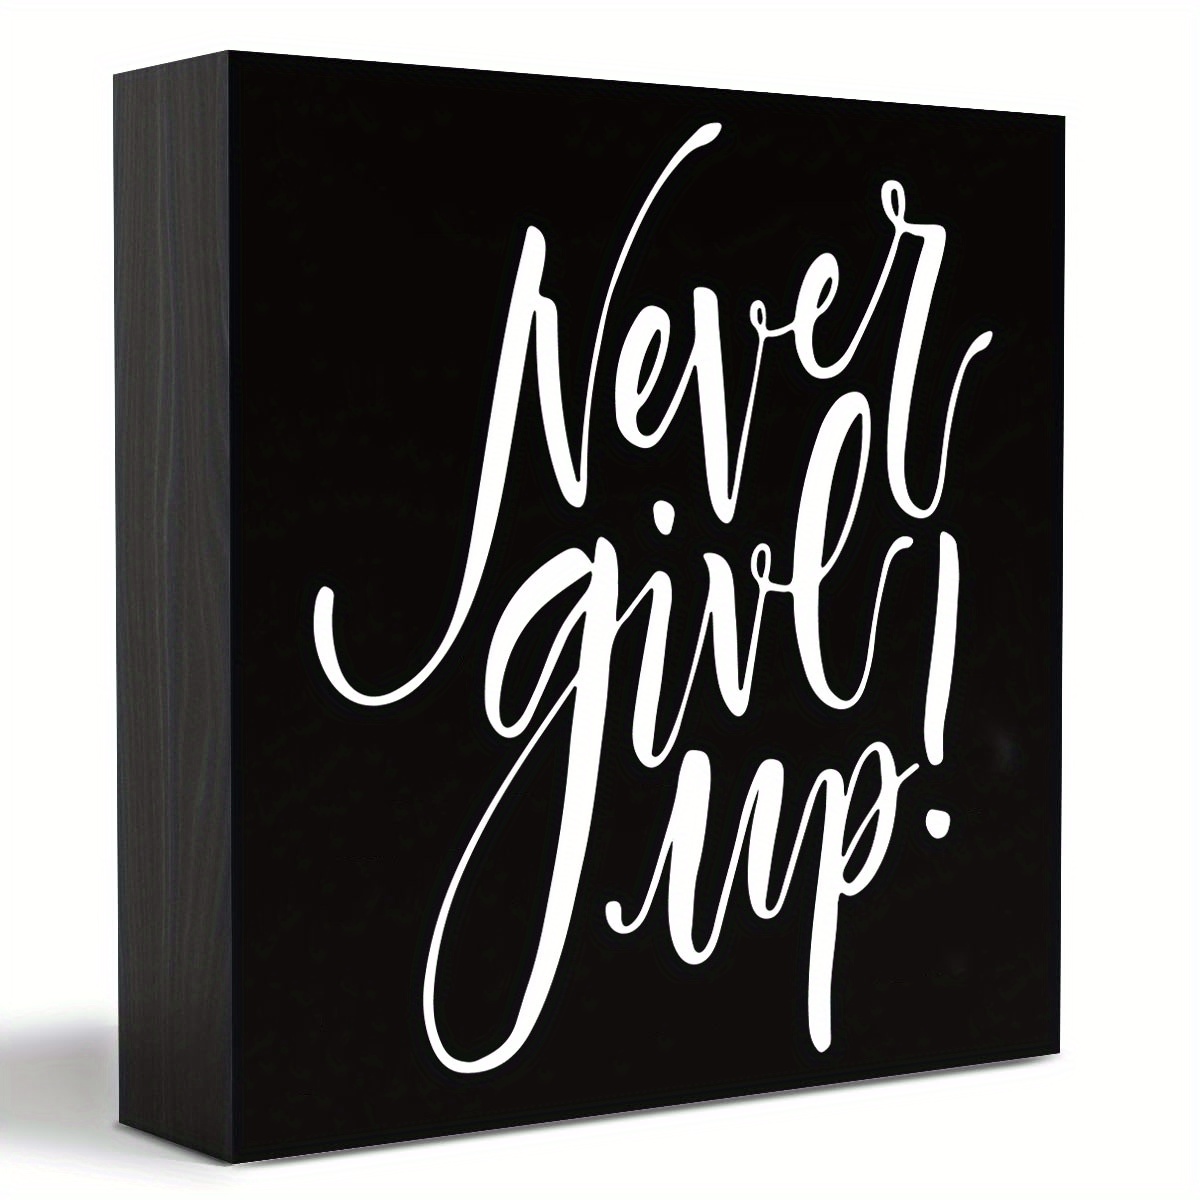 

1pc Never Give Up Artwork Wood Box Sign Rustic Farmhouse Style Wood Block Plaque 5 X 5 Inches Home Living Room Desk Sign Decor For Presents